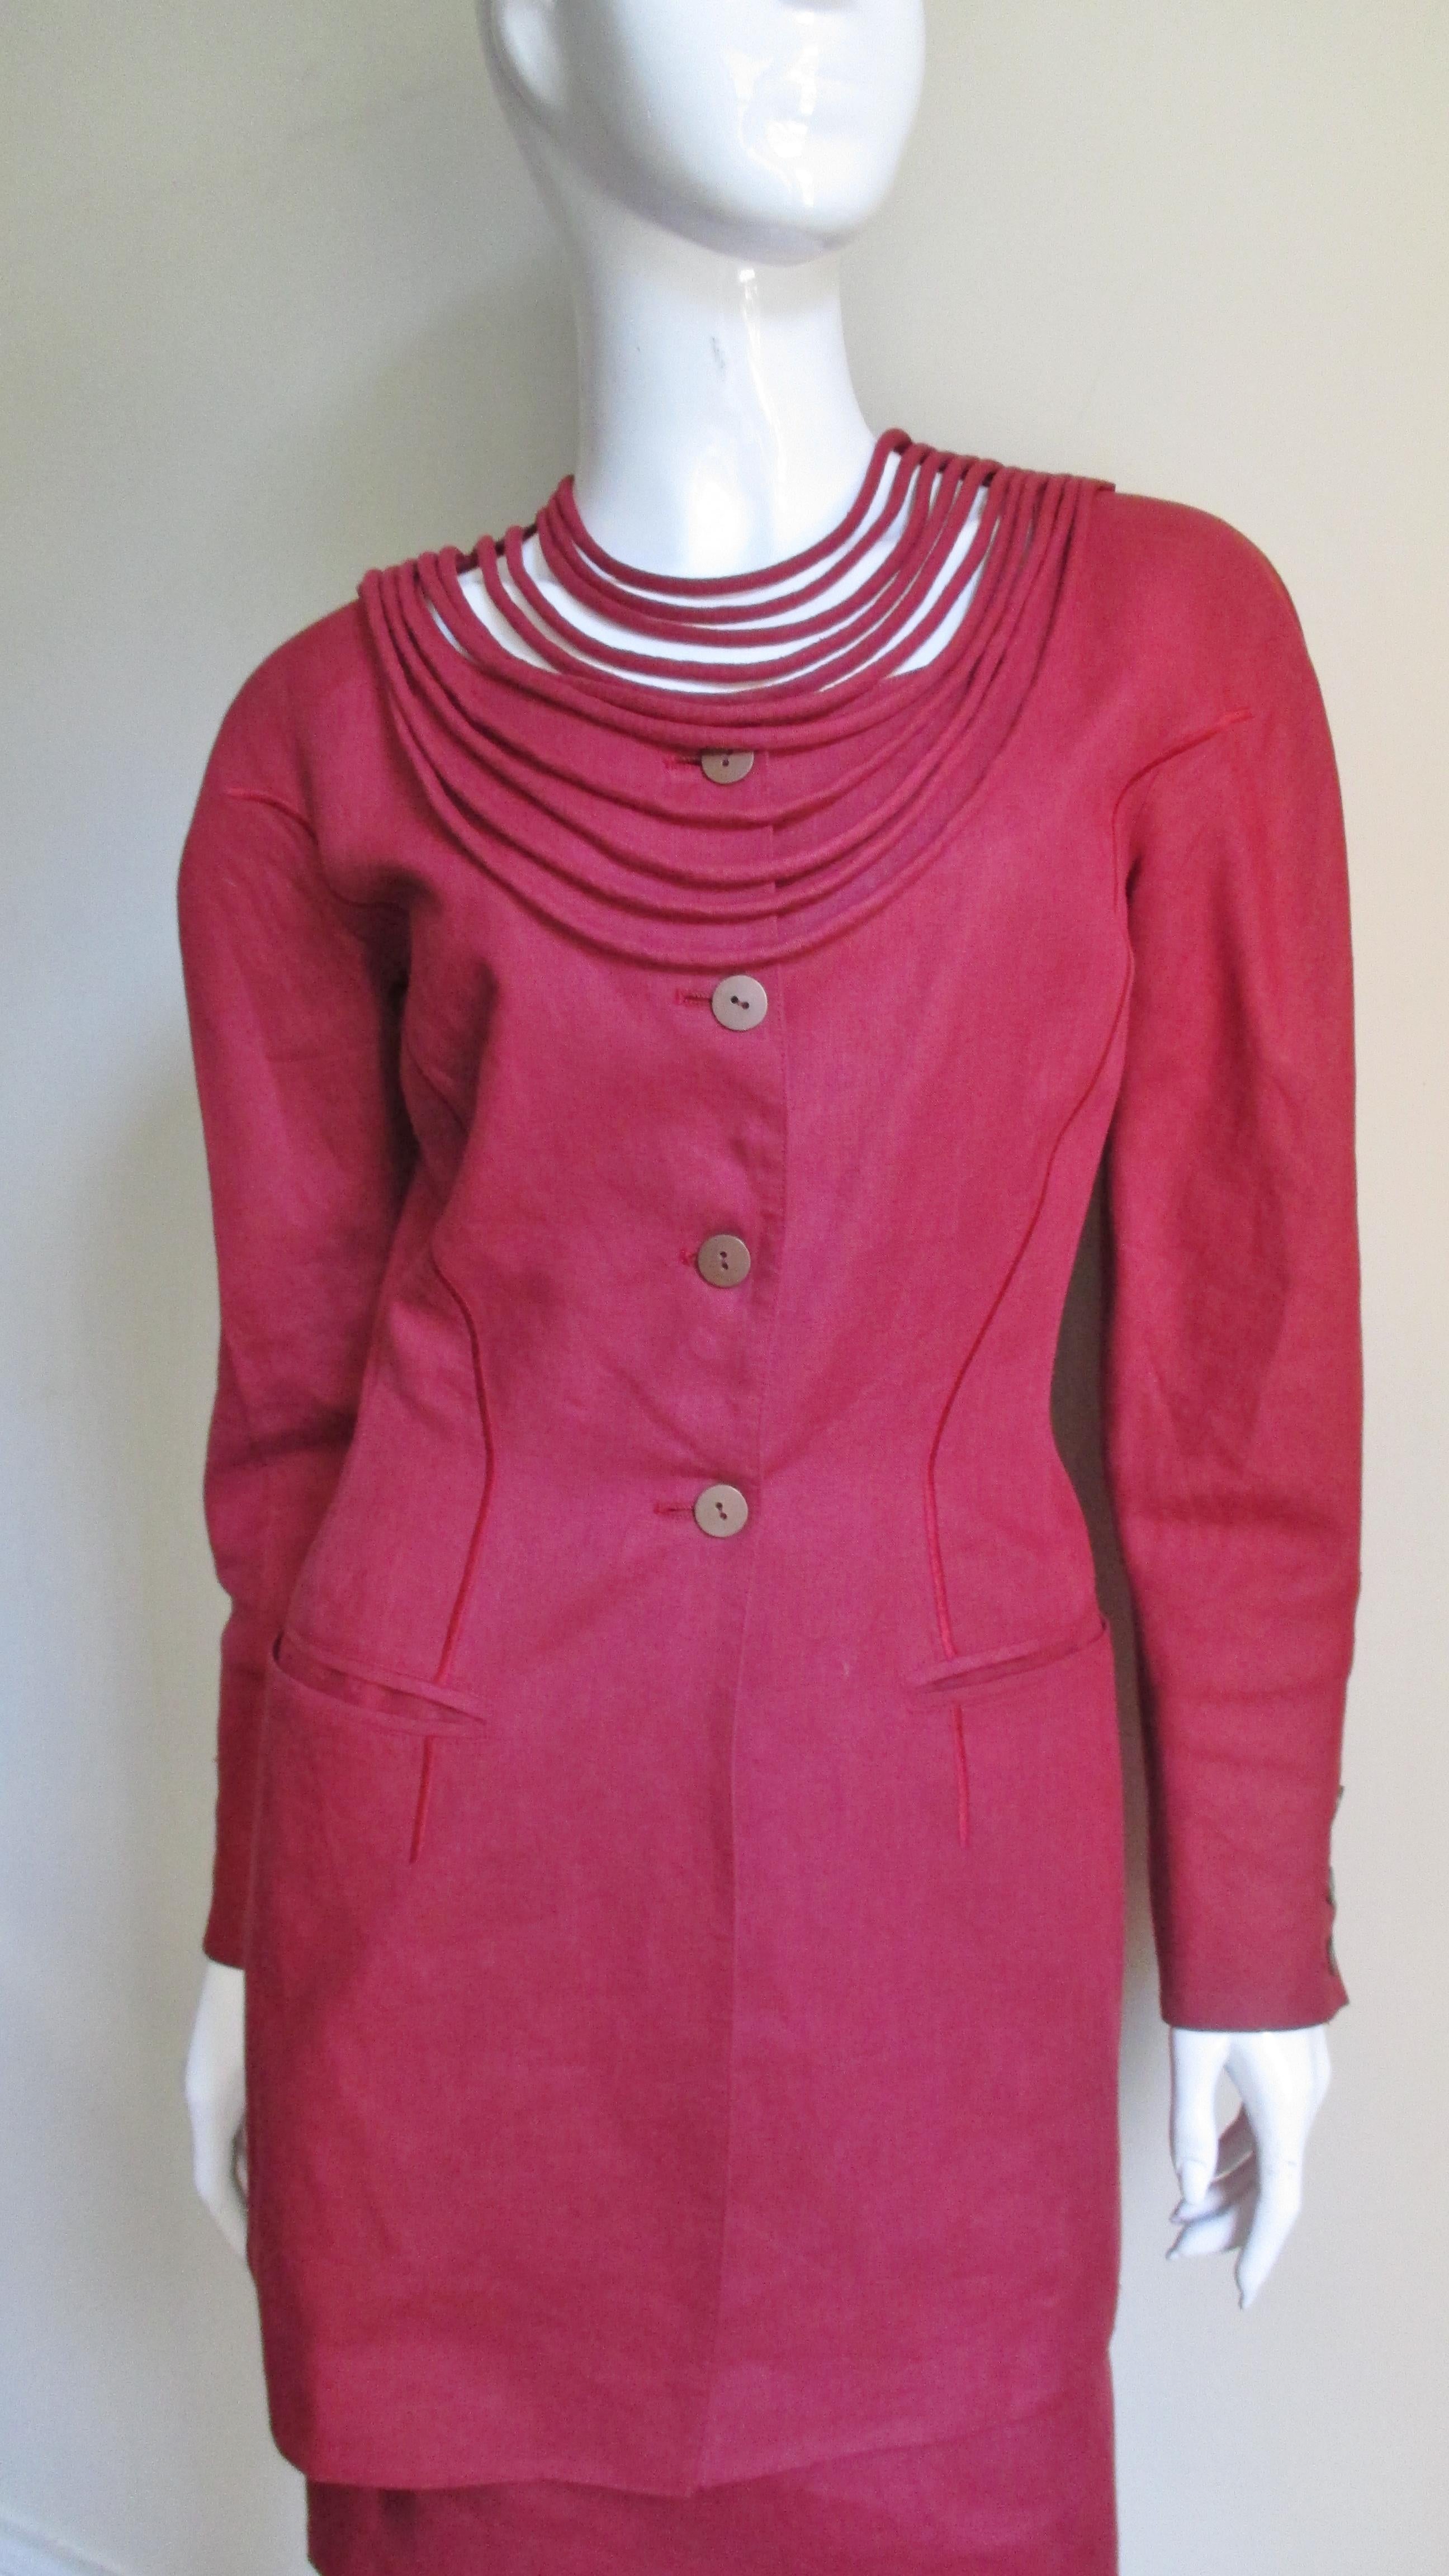 A fabulous deep red linen skirt suit from Claude Montana.  The jacket has lots of fabulous detail including rows of finely piped fabric draping like necklaces at the front neck.  It has shoulder padding, princess seaming, welt pockets and buttons at